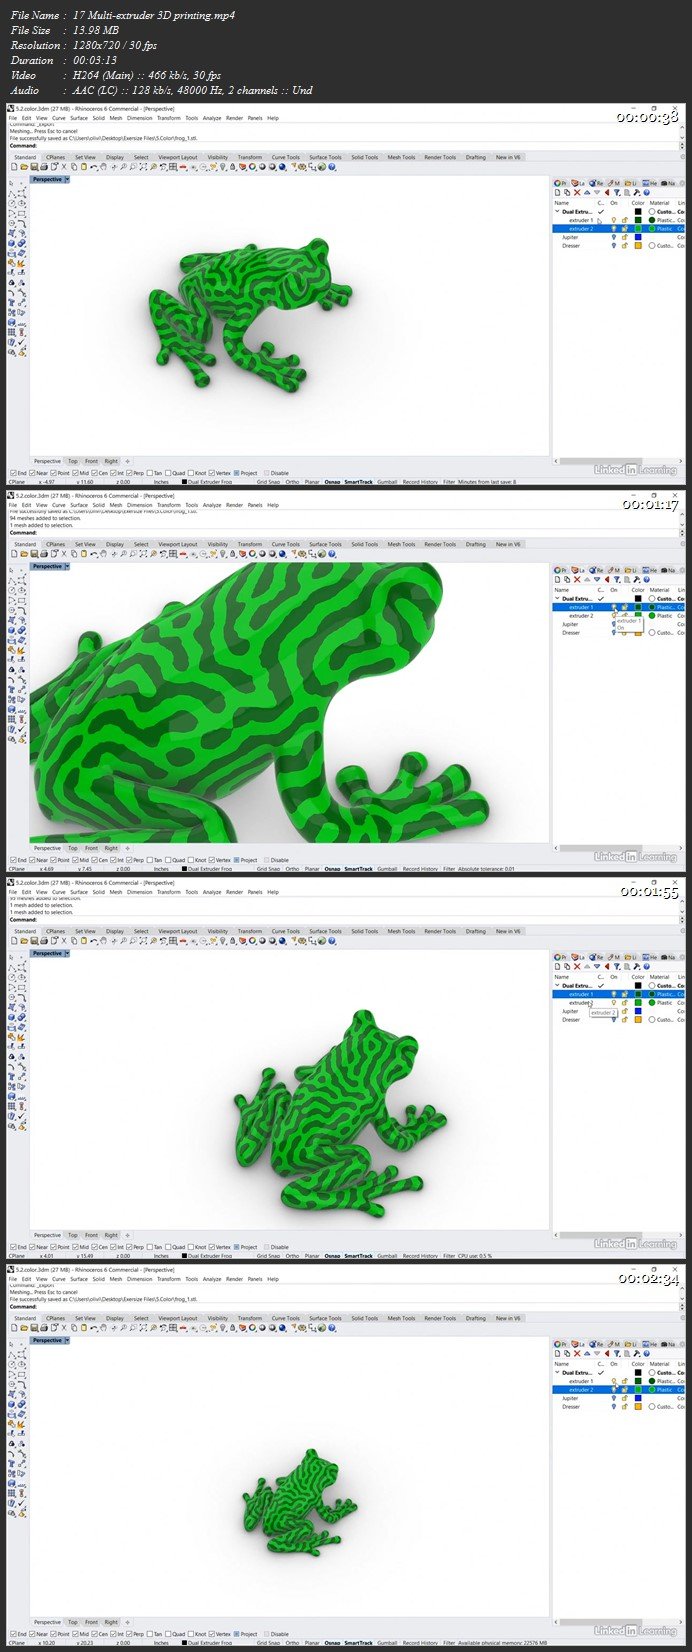 Rhino: Modeling for 3D Printing